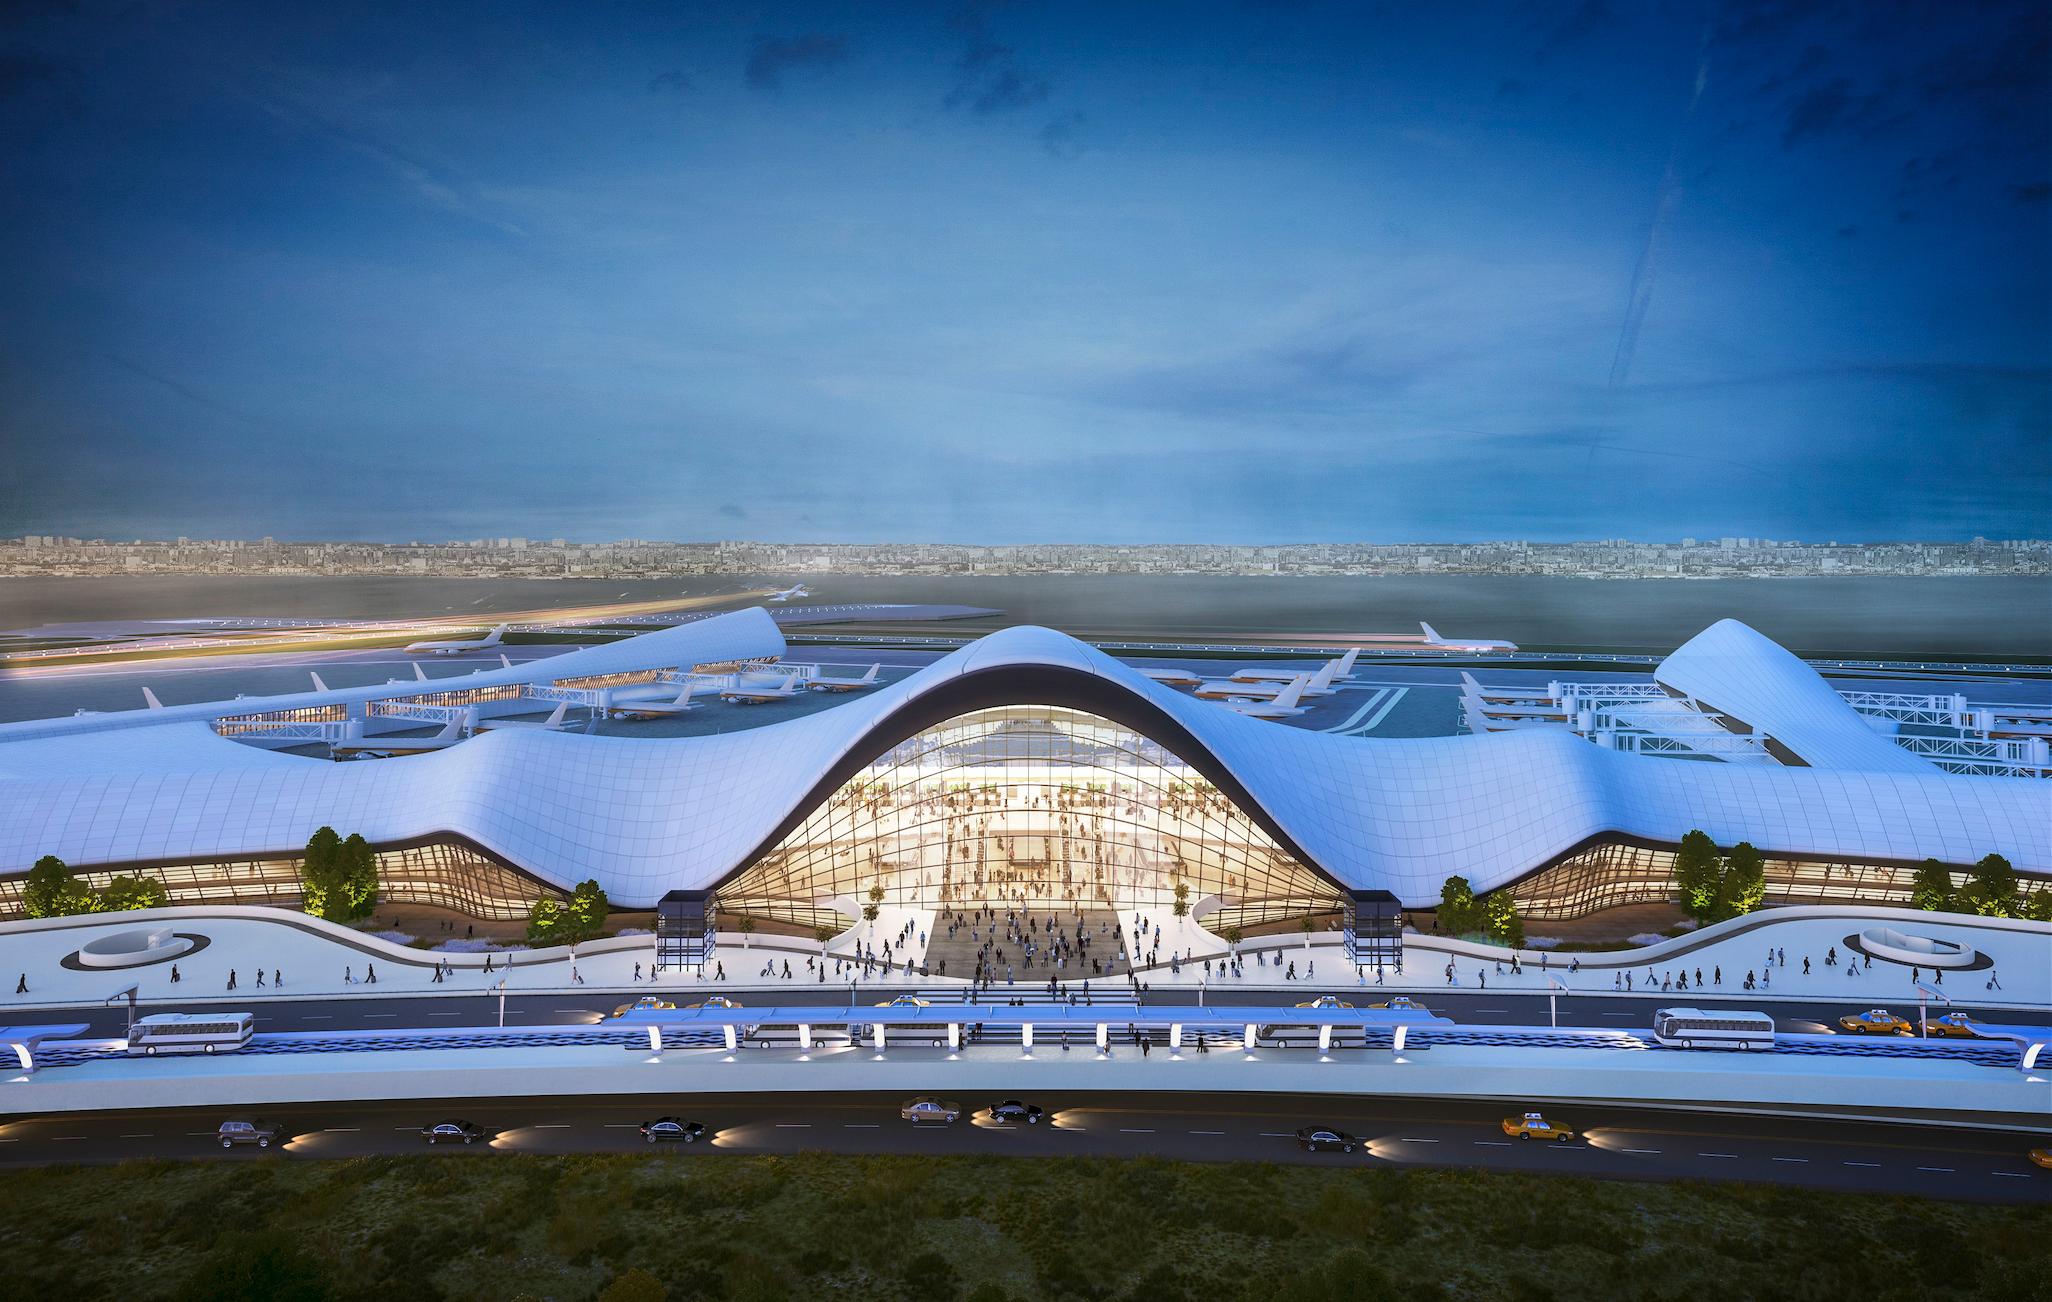 Conceptual rendering of redeveloped LaGuardia Airport, rendering by Neoscape